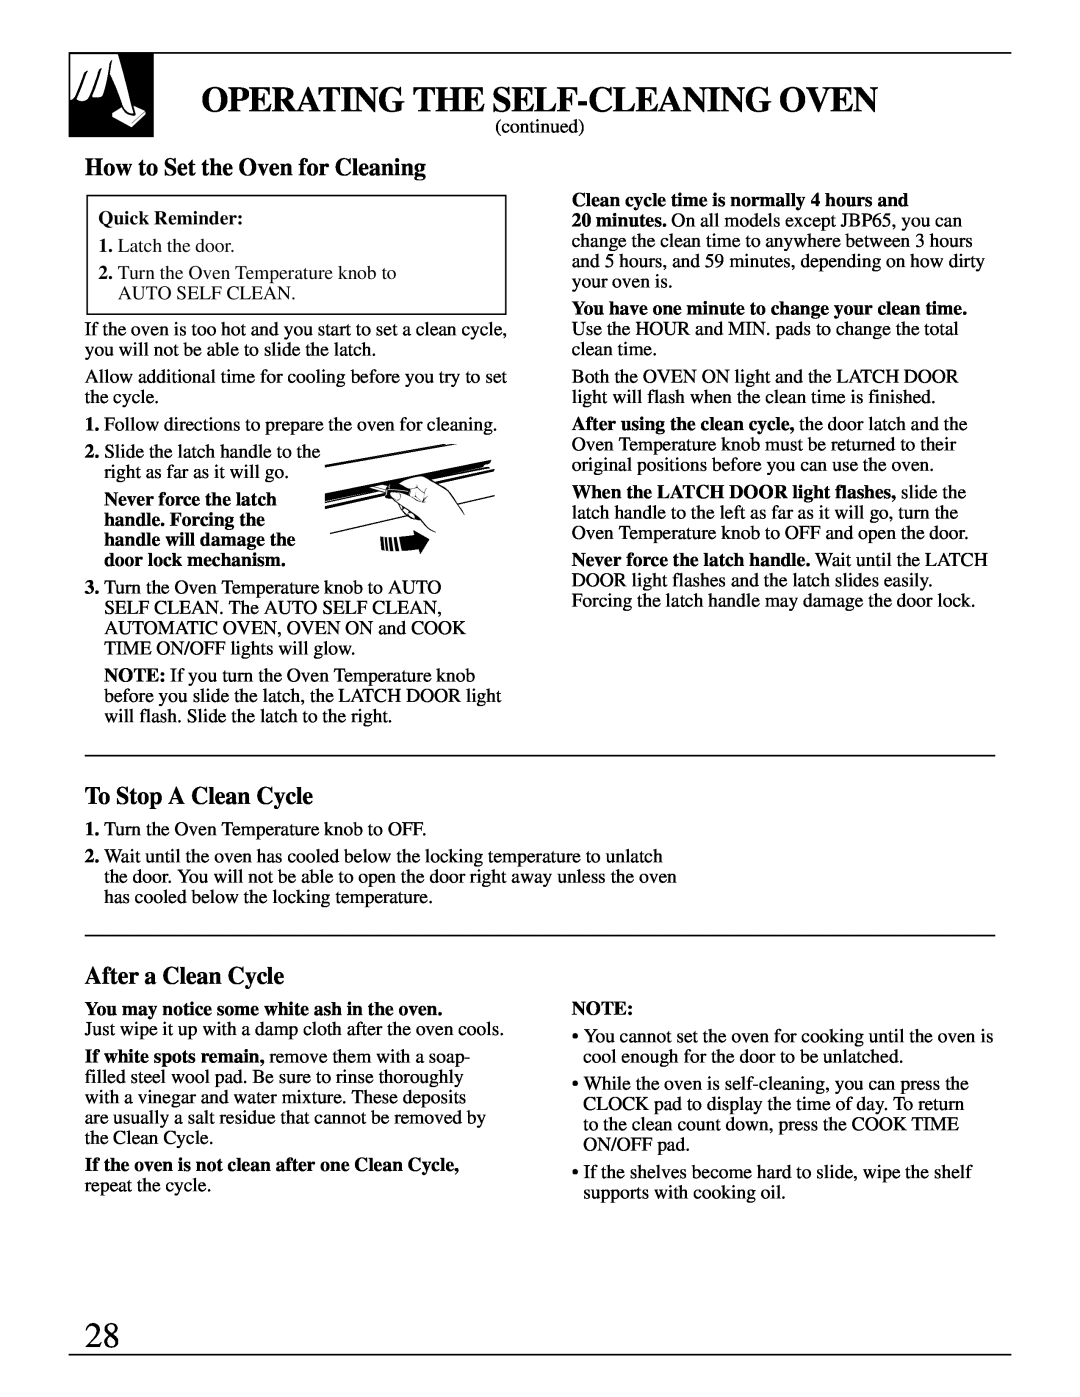 GE 49-8723 How to Set the Oven for Cleaning, To Stop A Clean Cycle, After a Clean Cycle, Operating The Self-Cleaningoven 